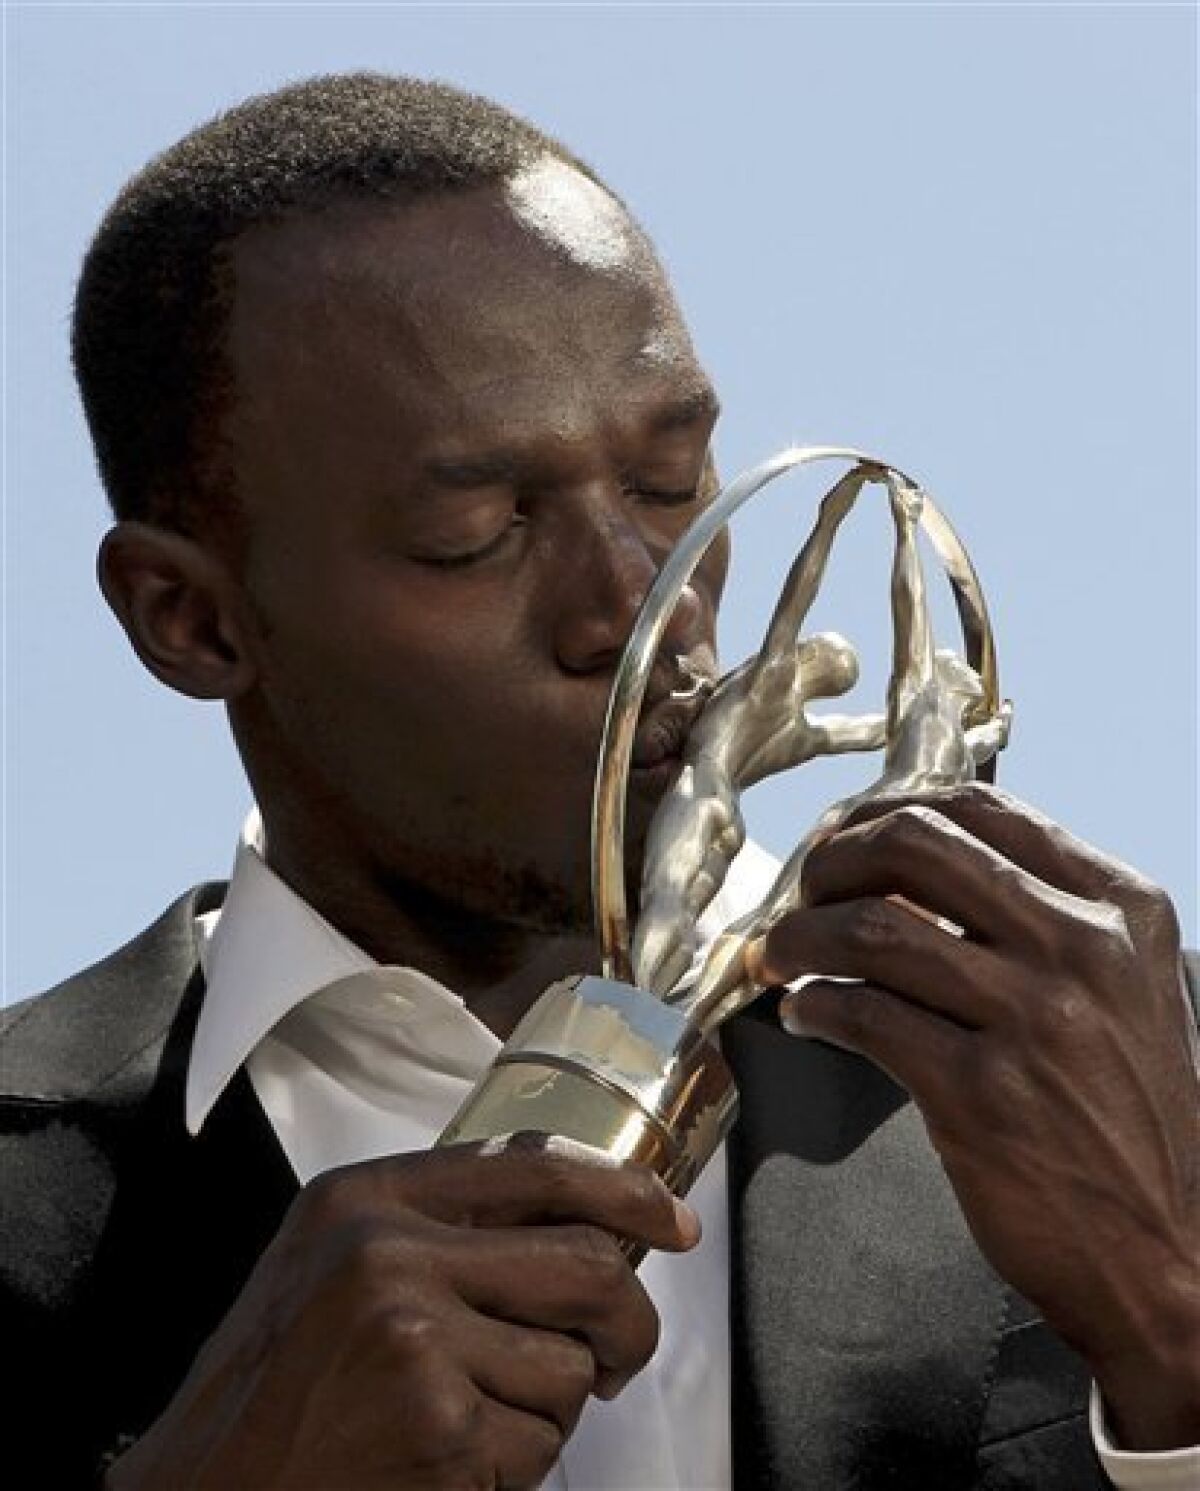 In this image released by the Laureus Awards on Wednesday March 10, 2010, Jamaican sprint star Usain Bolt kisses the Laureus World Sportsman of the Year Award in Kingston, Jamaica. Bolt who won the Laureus World Sportsman of the Year for the second year running, was unable to attend the awards ceremony in Abu Dhabi, UAE, on Wednesday. (AP Photo/Nick Laham, Getty Images for Laureus)